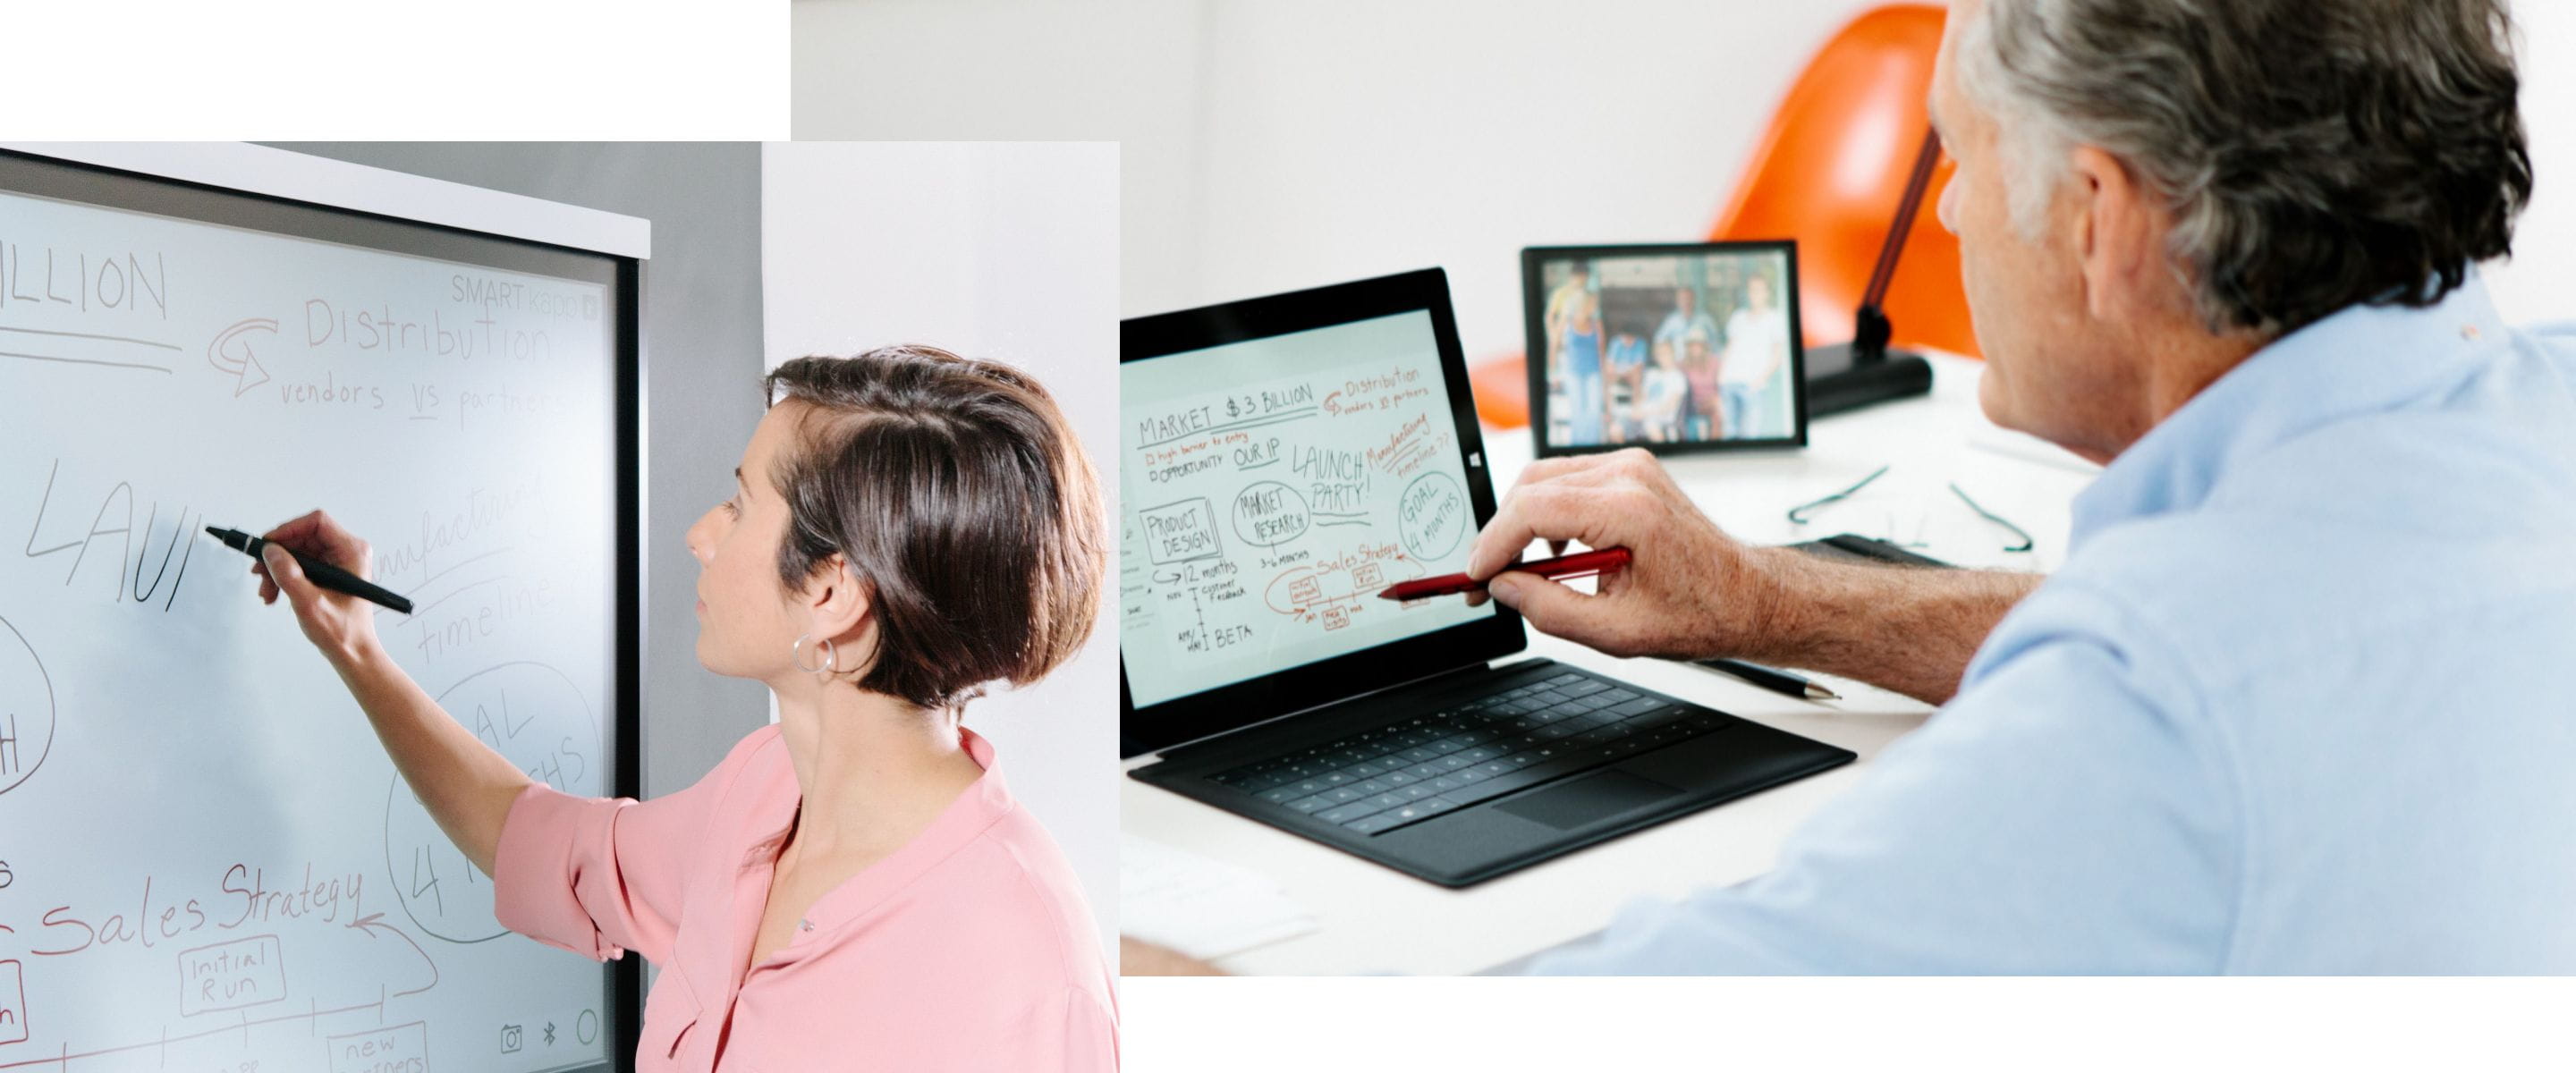 A professional woman writing on a SMART Interactive Display during a collaborative session, while a male colleague works on a connected digital tablet, illustrating teamwork across SMART devices.